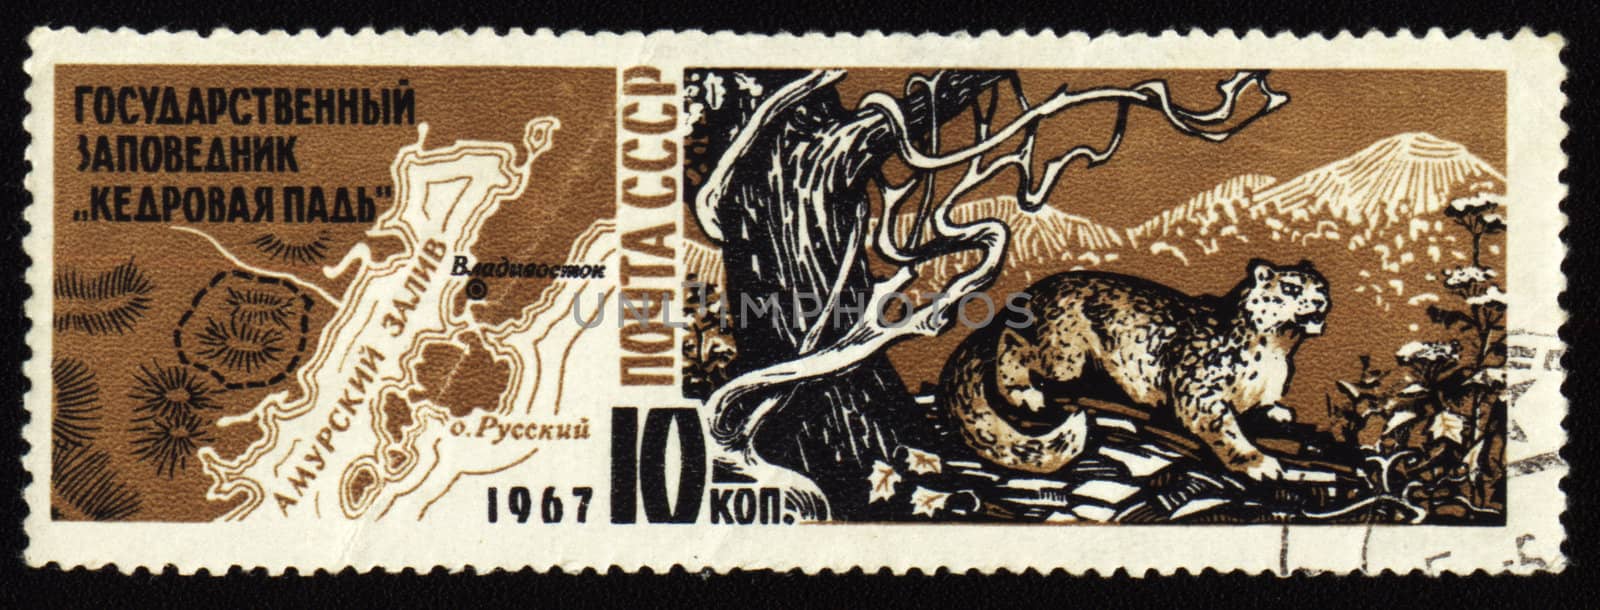 Postage stamp printed in USSR shows map of Cedar Pad Reserve and leopard